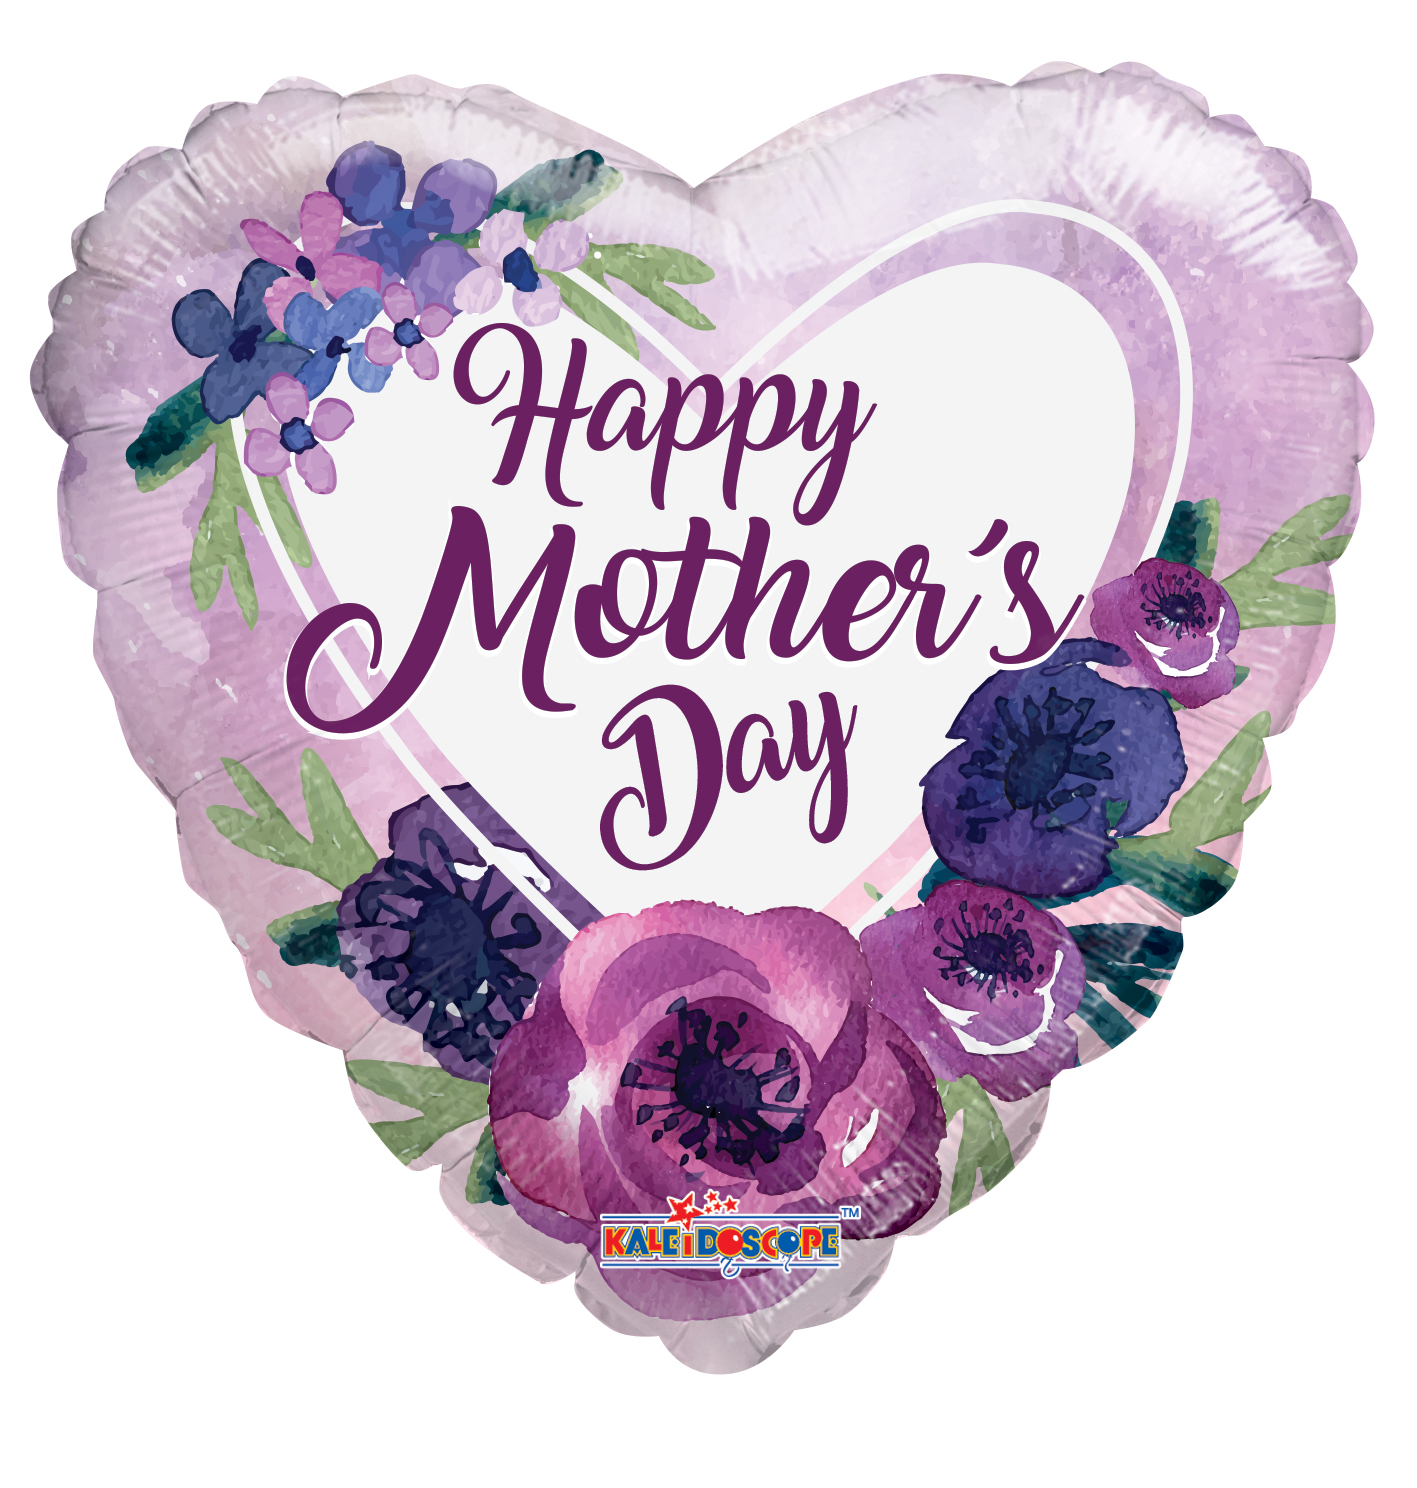 happy mothers day purple flowers